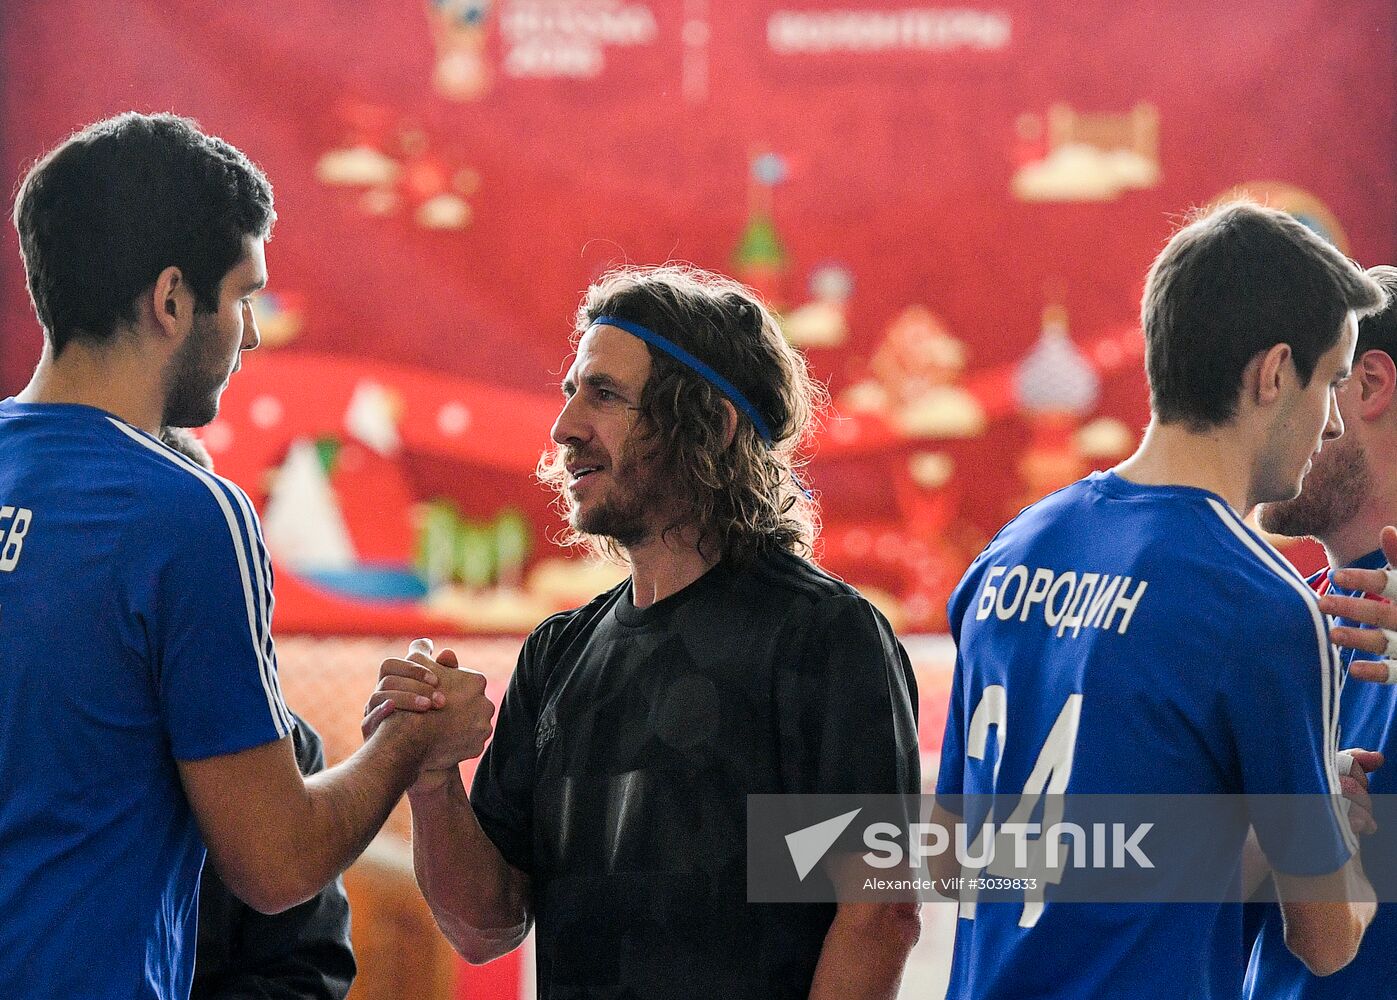 Football player Carles Puyol meets with prospective 2017 Confederations Cup volunteers in Moscow